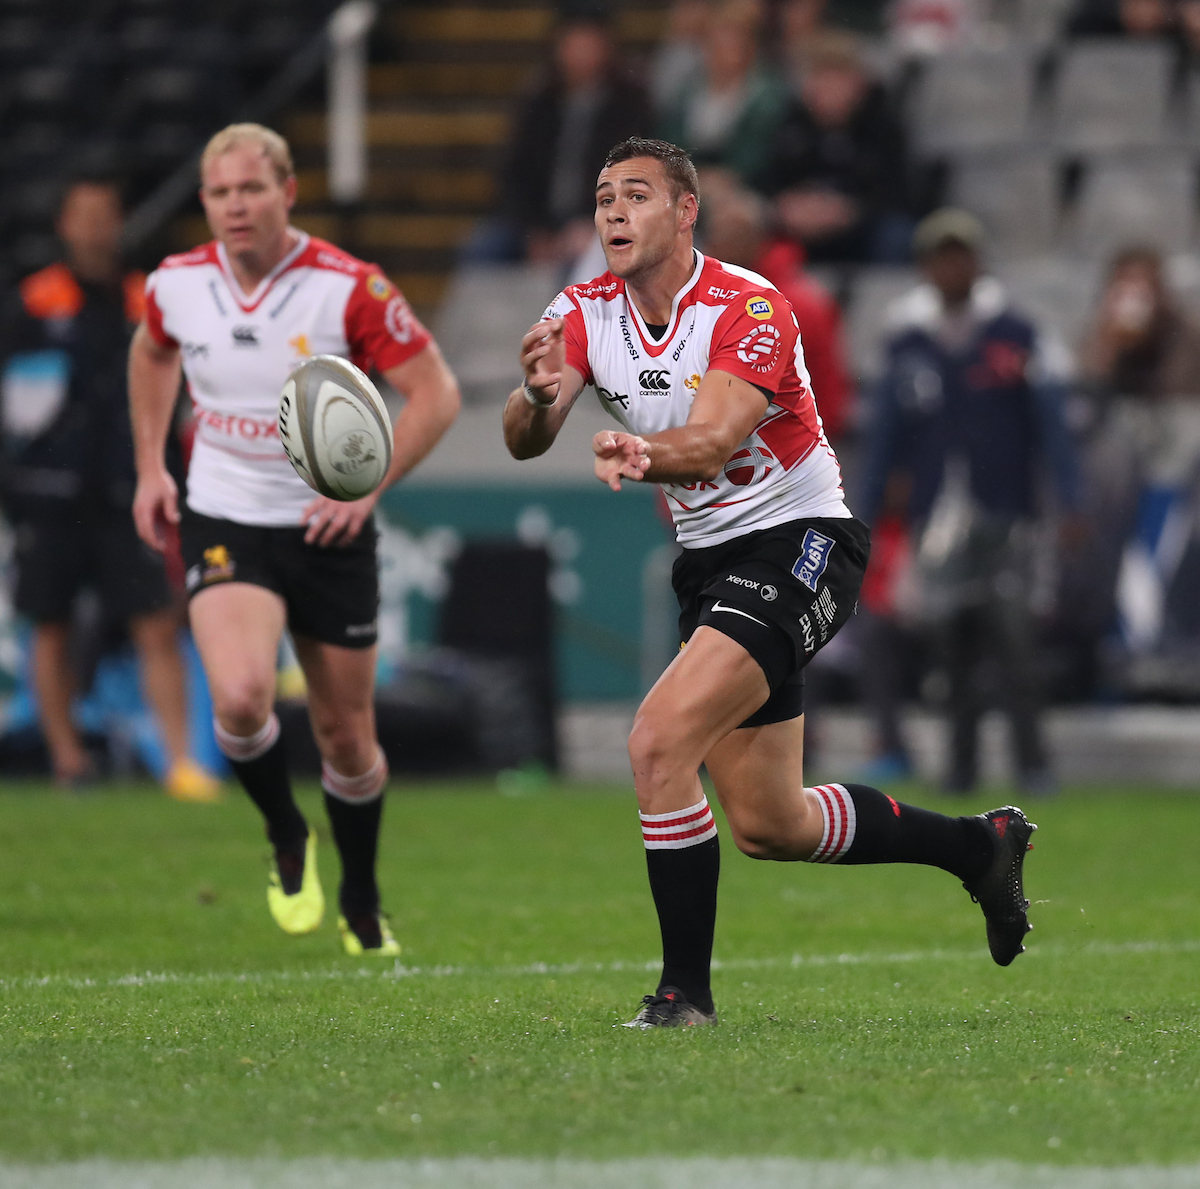 Shaun Reynolds of the Xerox Golden Lions during the Currie Cup 